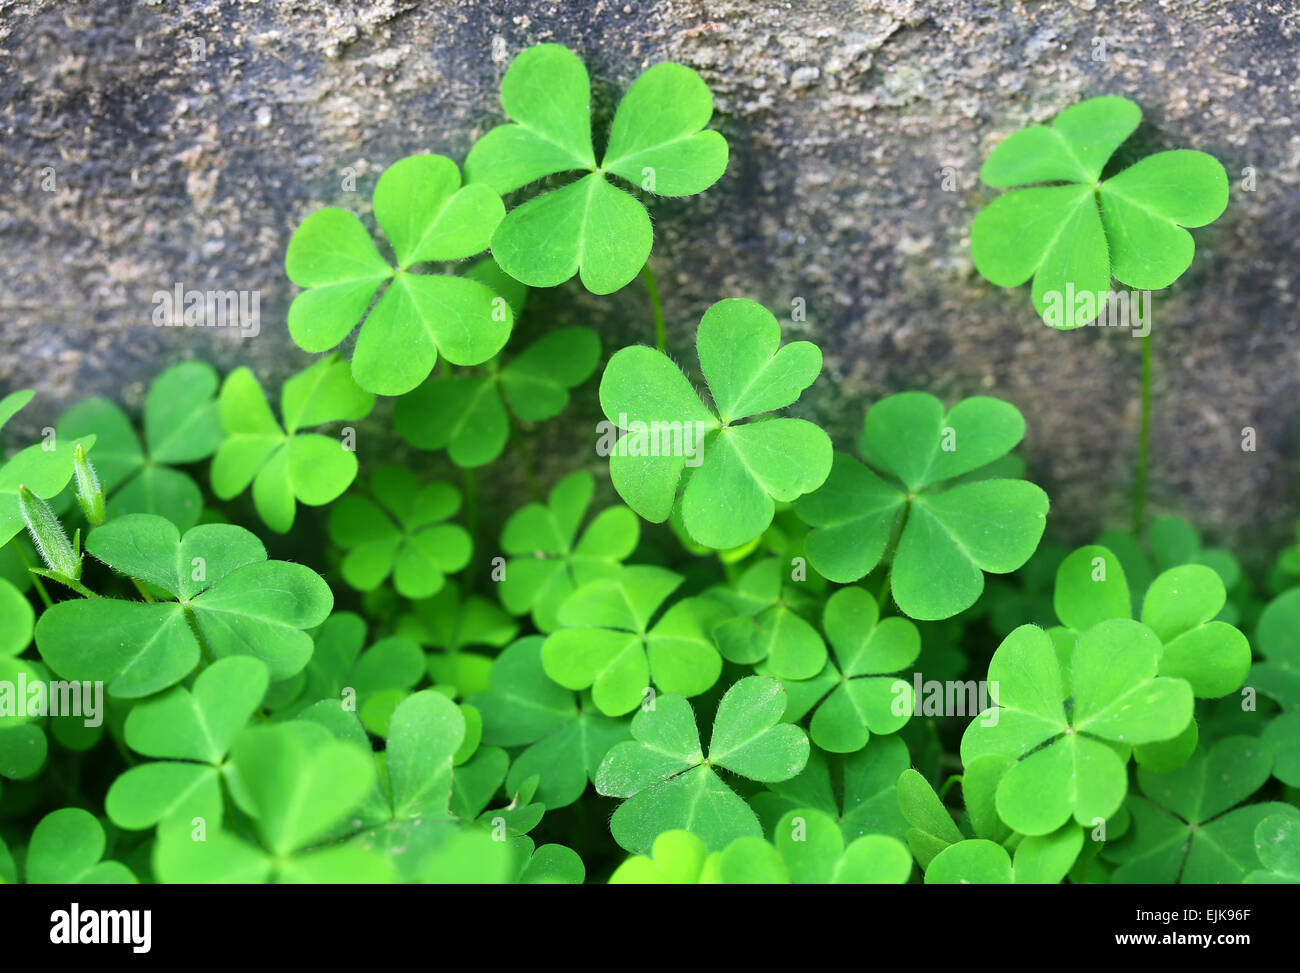 Background of lush green clover leaves Stock Photo